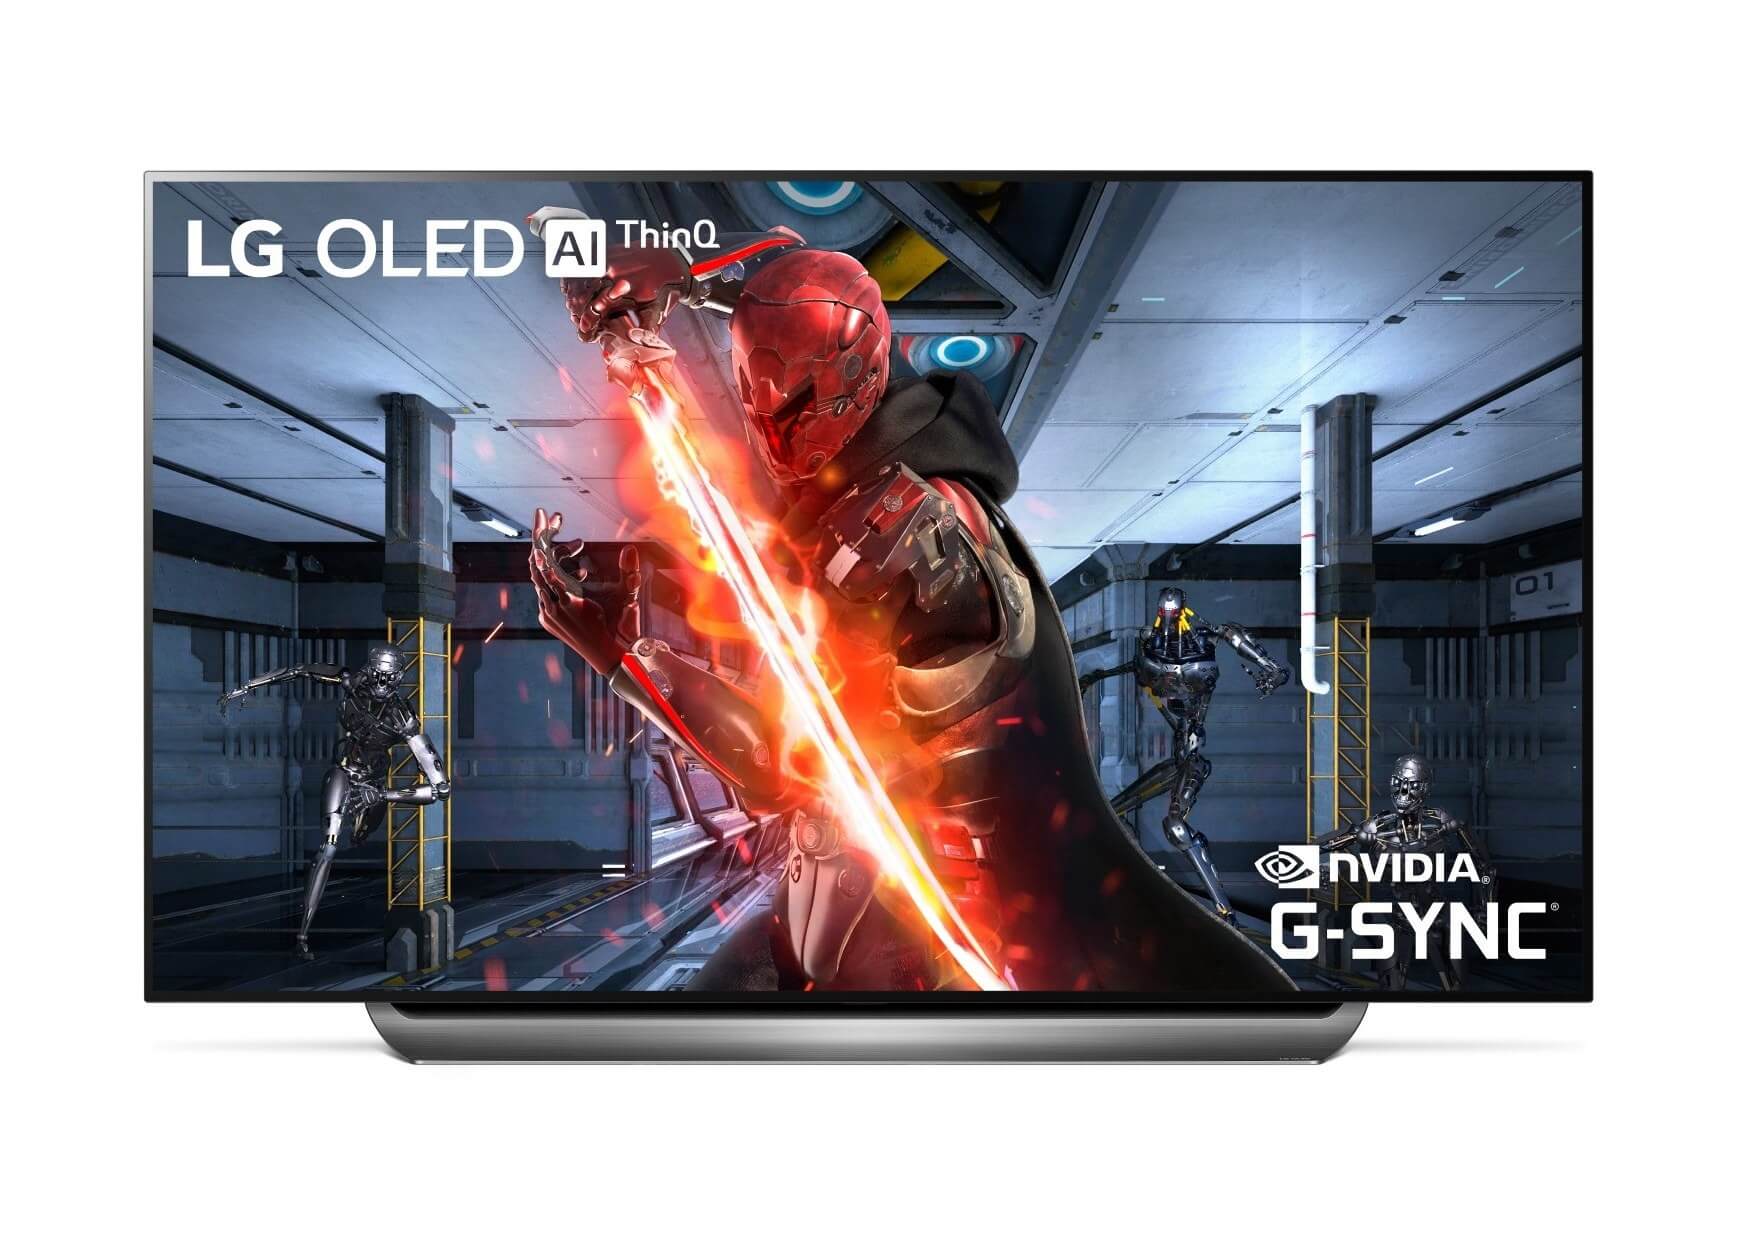 LG's 2019 OLED TVs will soon receive G-Sync support